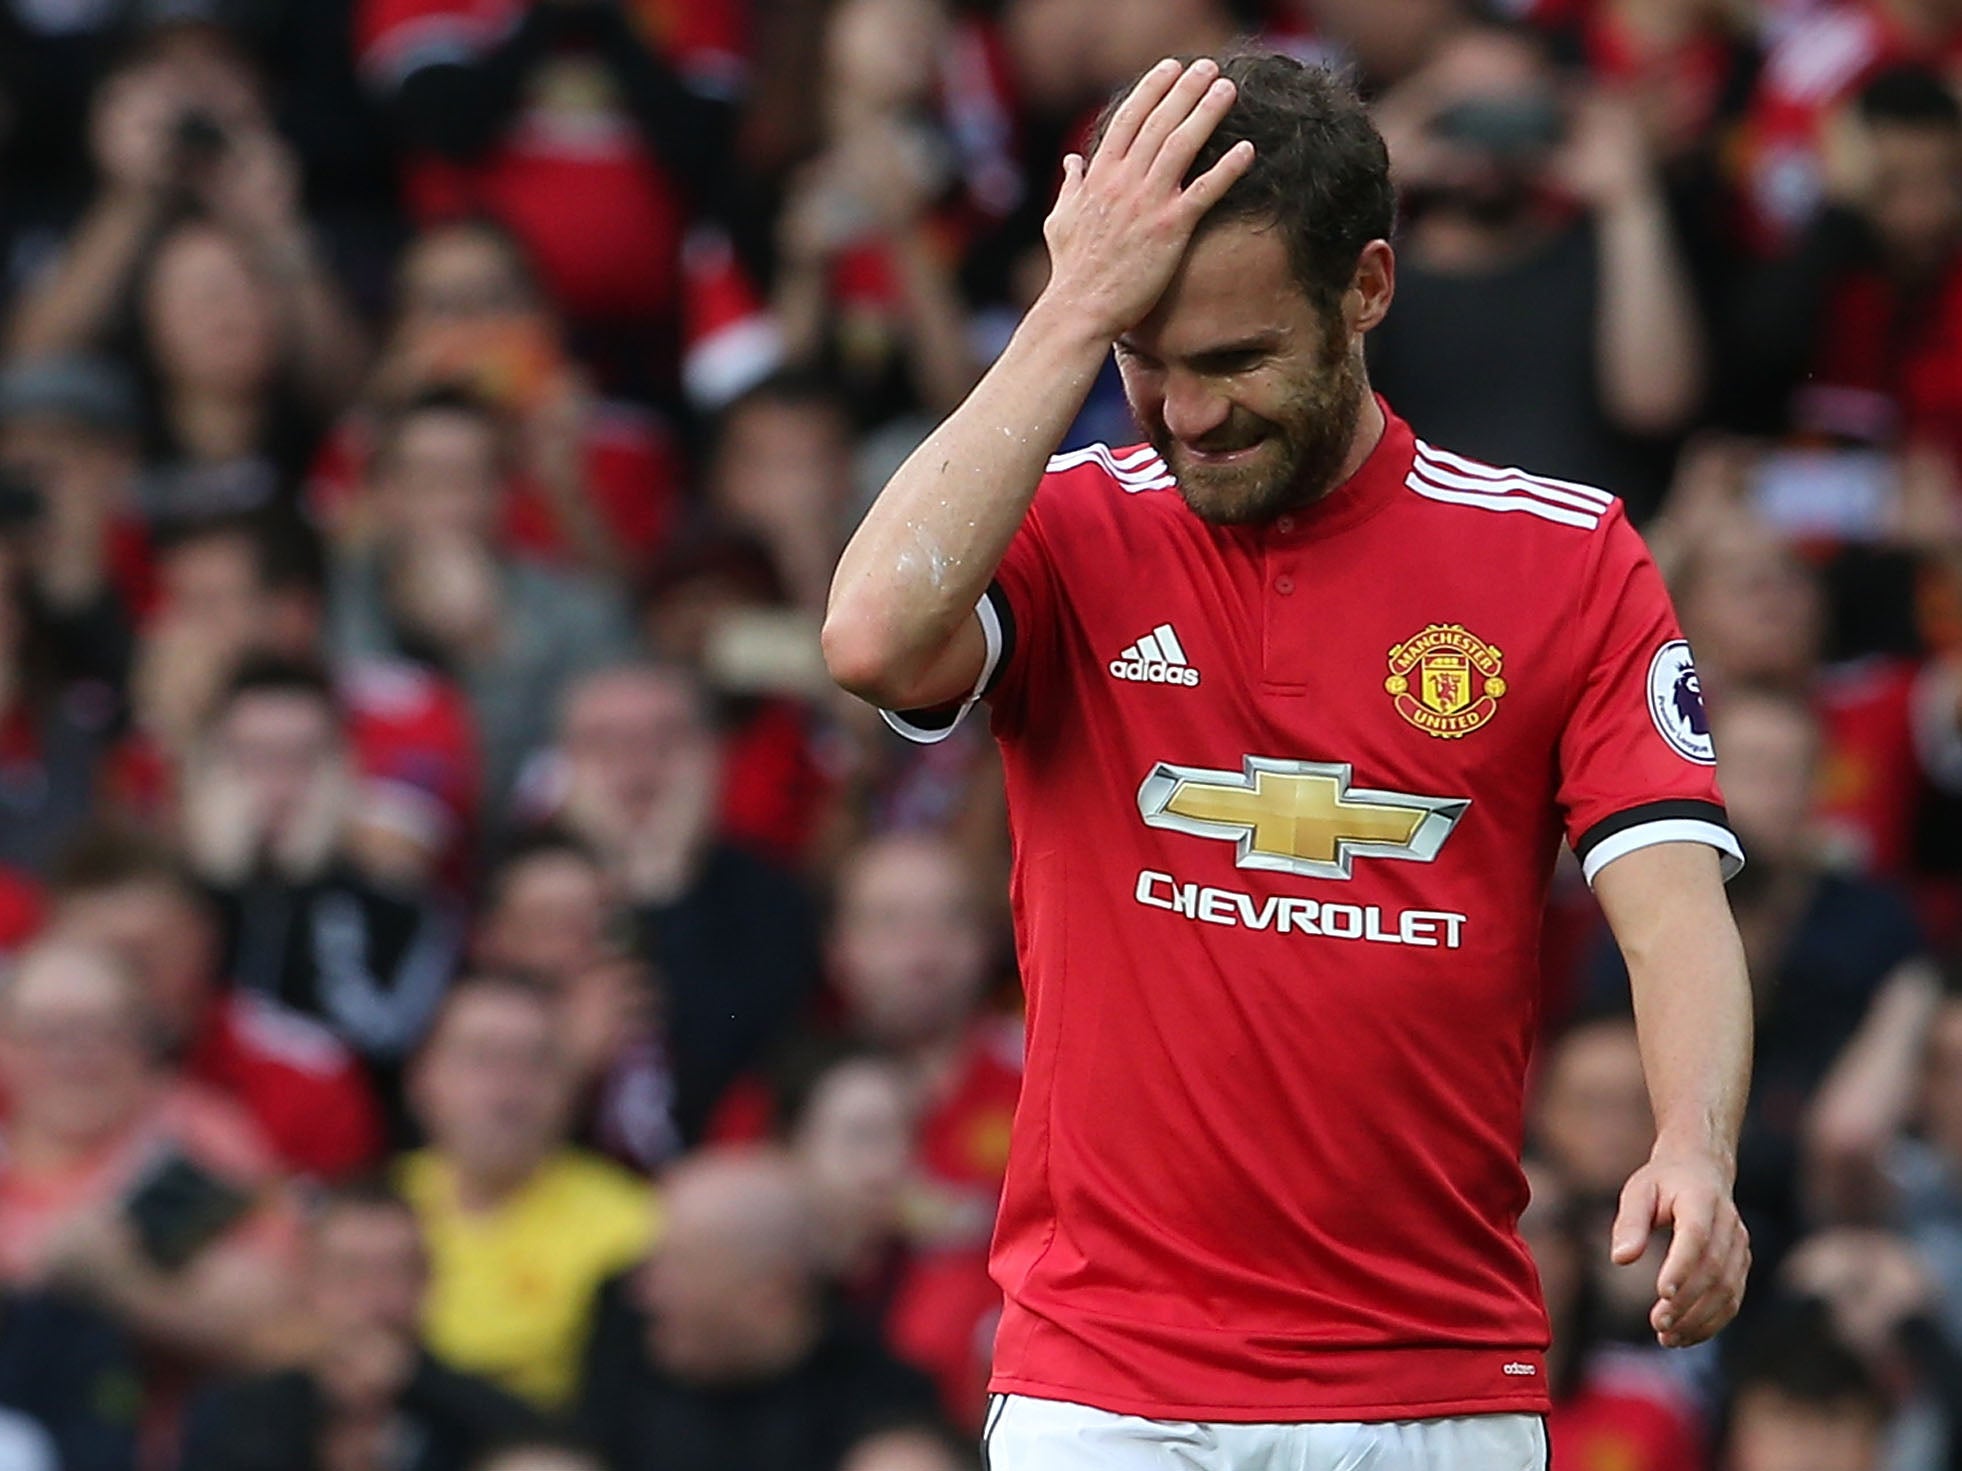 Mata insisted the win was not as easy as the scoreline suggested